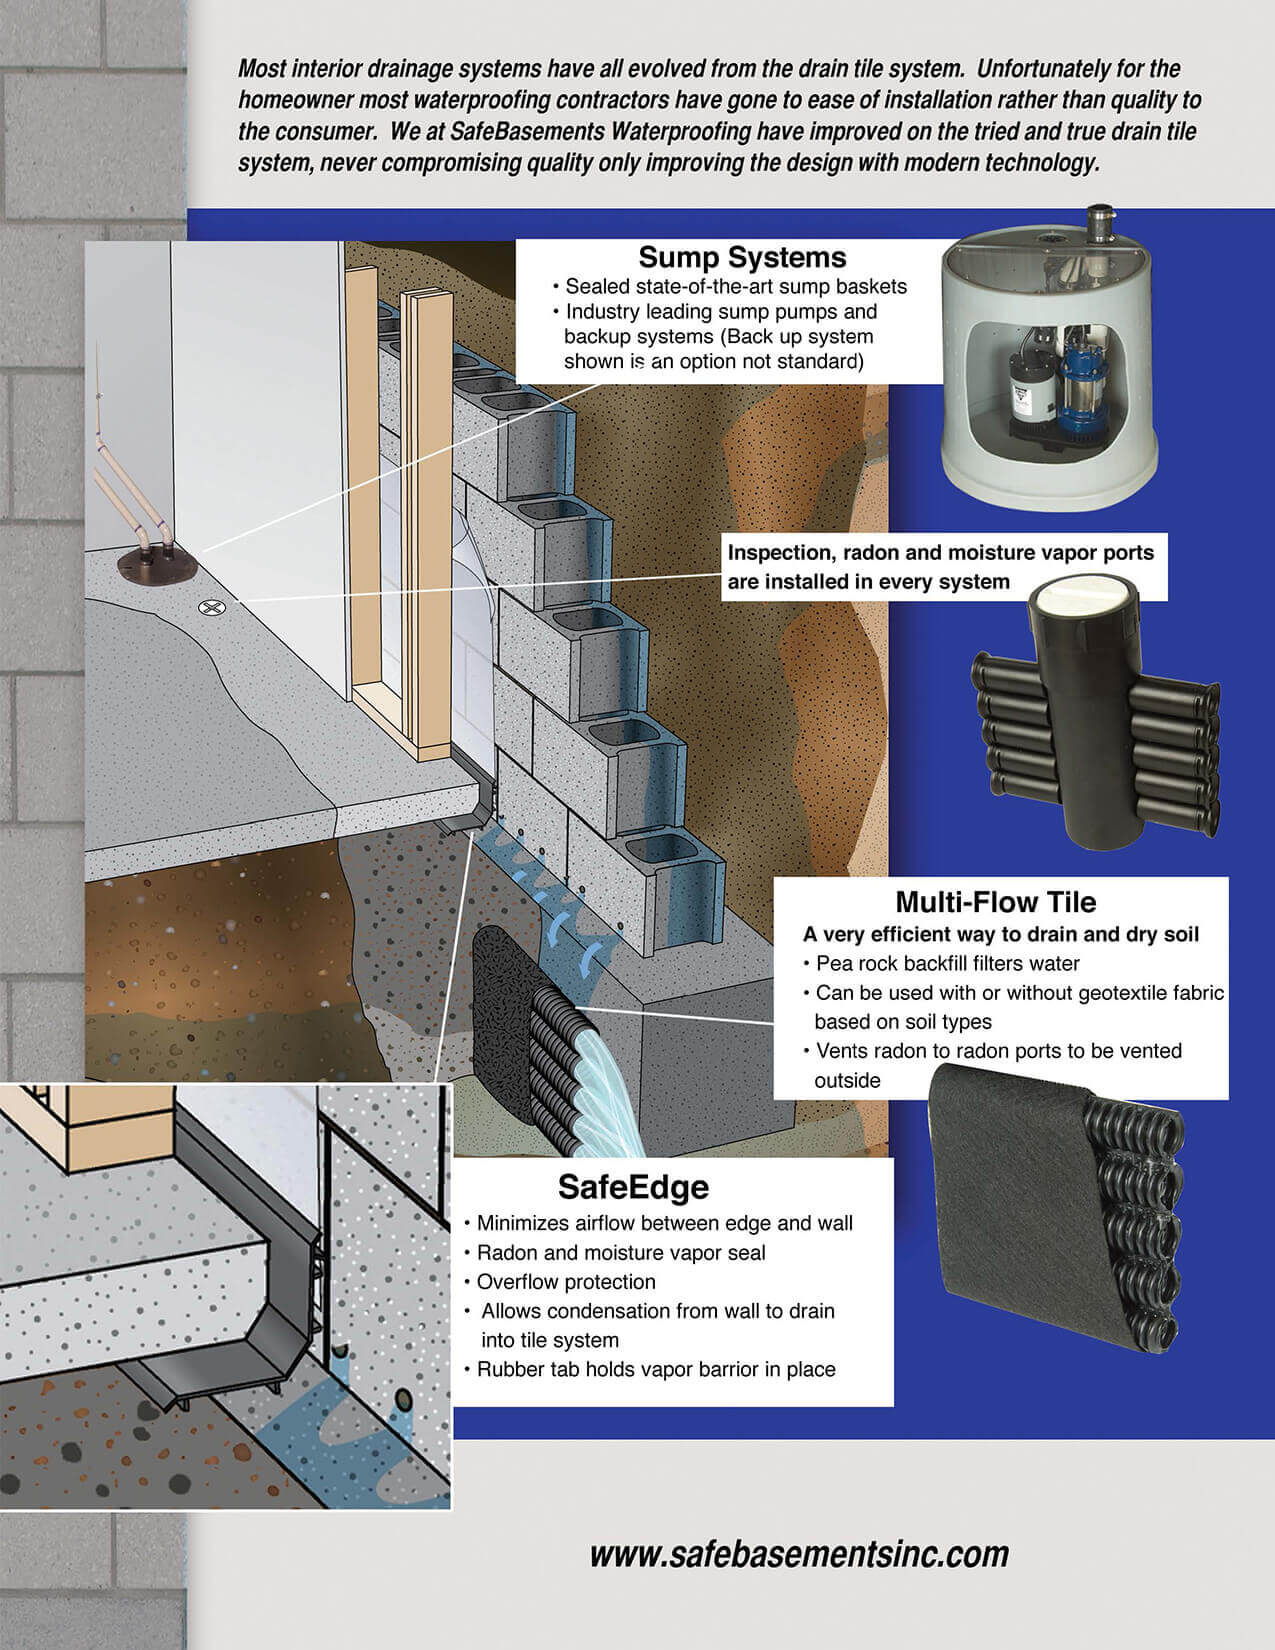 Safeedge Waterproofing System Basement Drainage